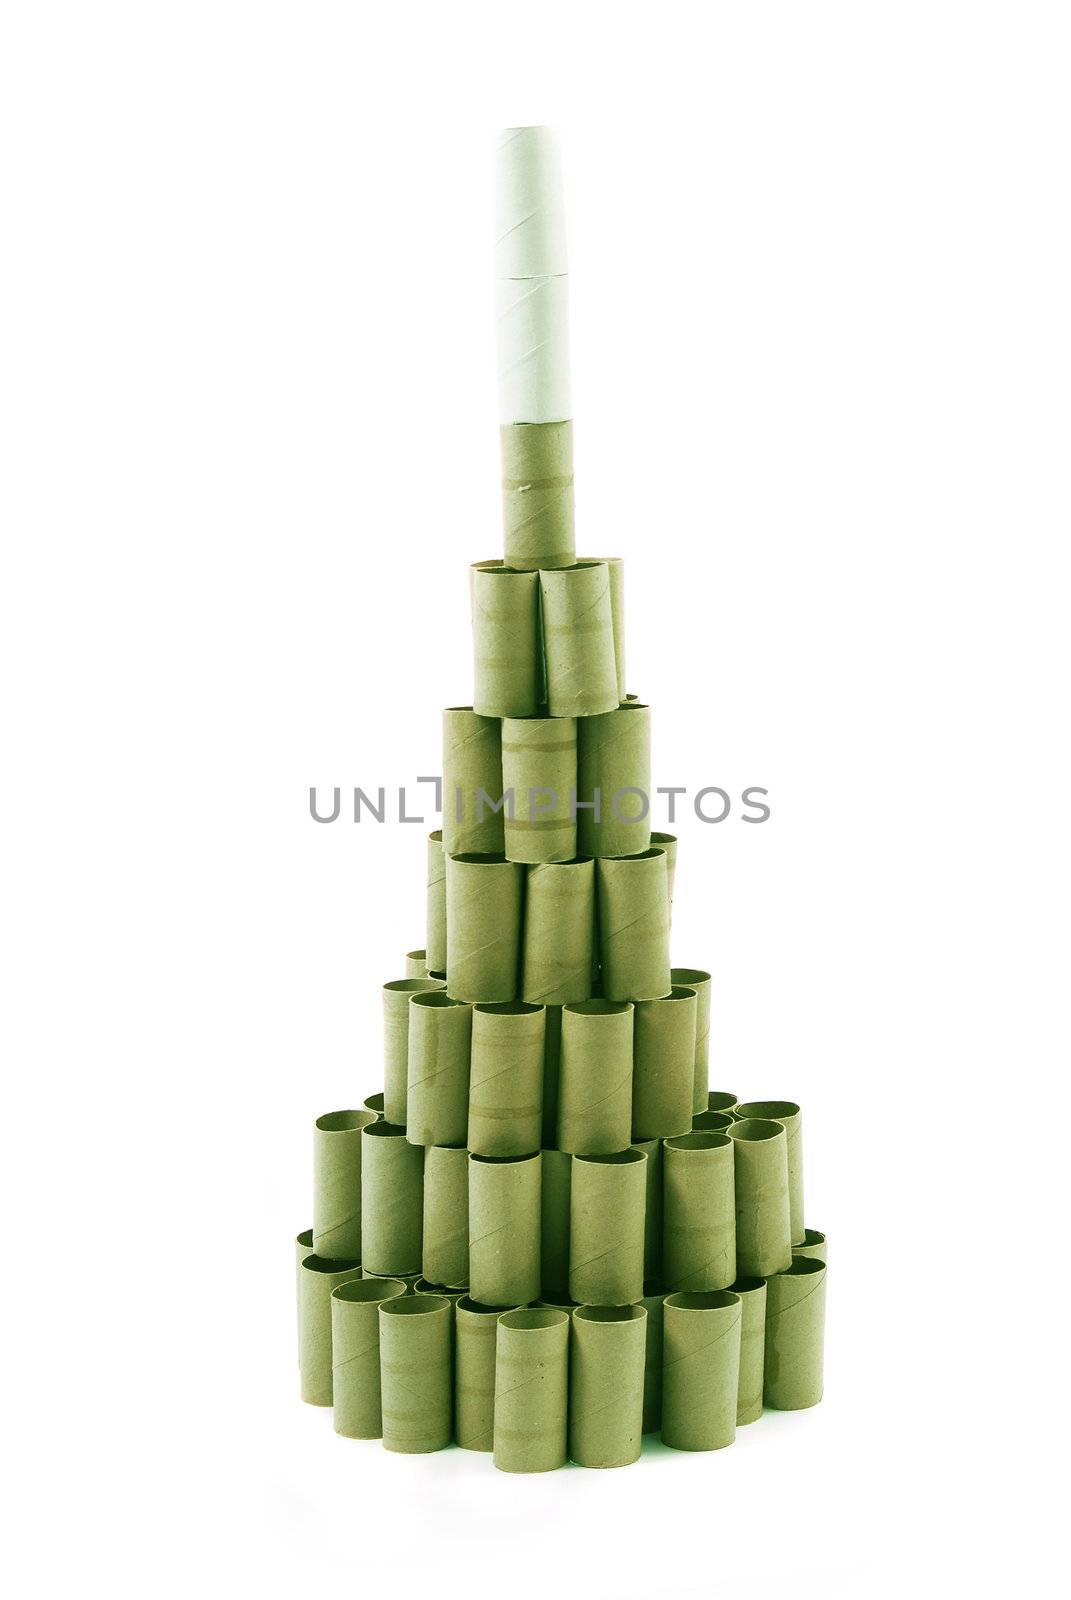 Christmas Tree made of paper rolls by cienpies